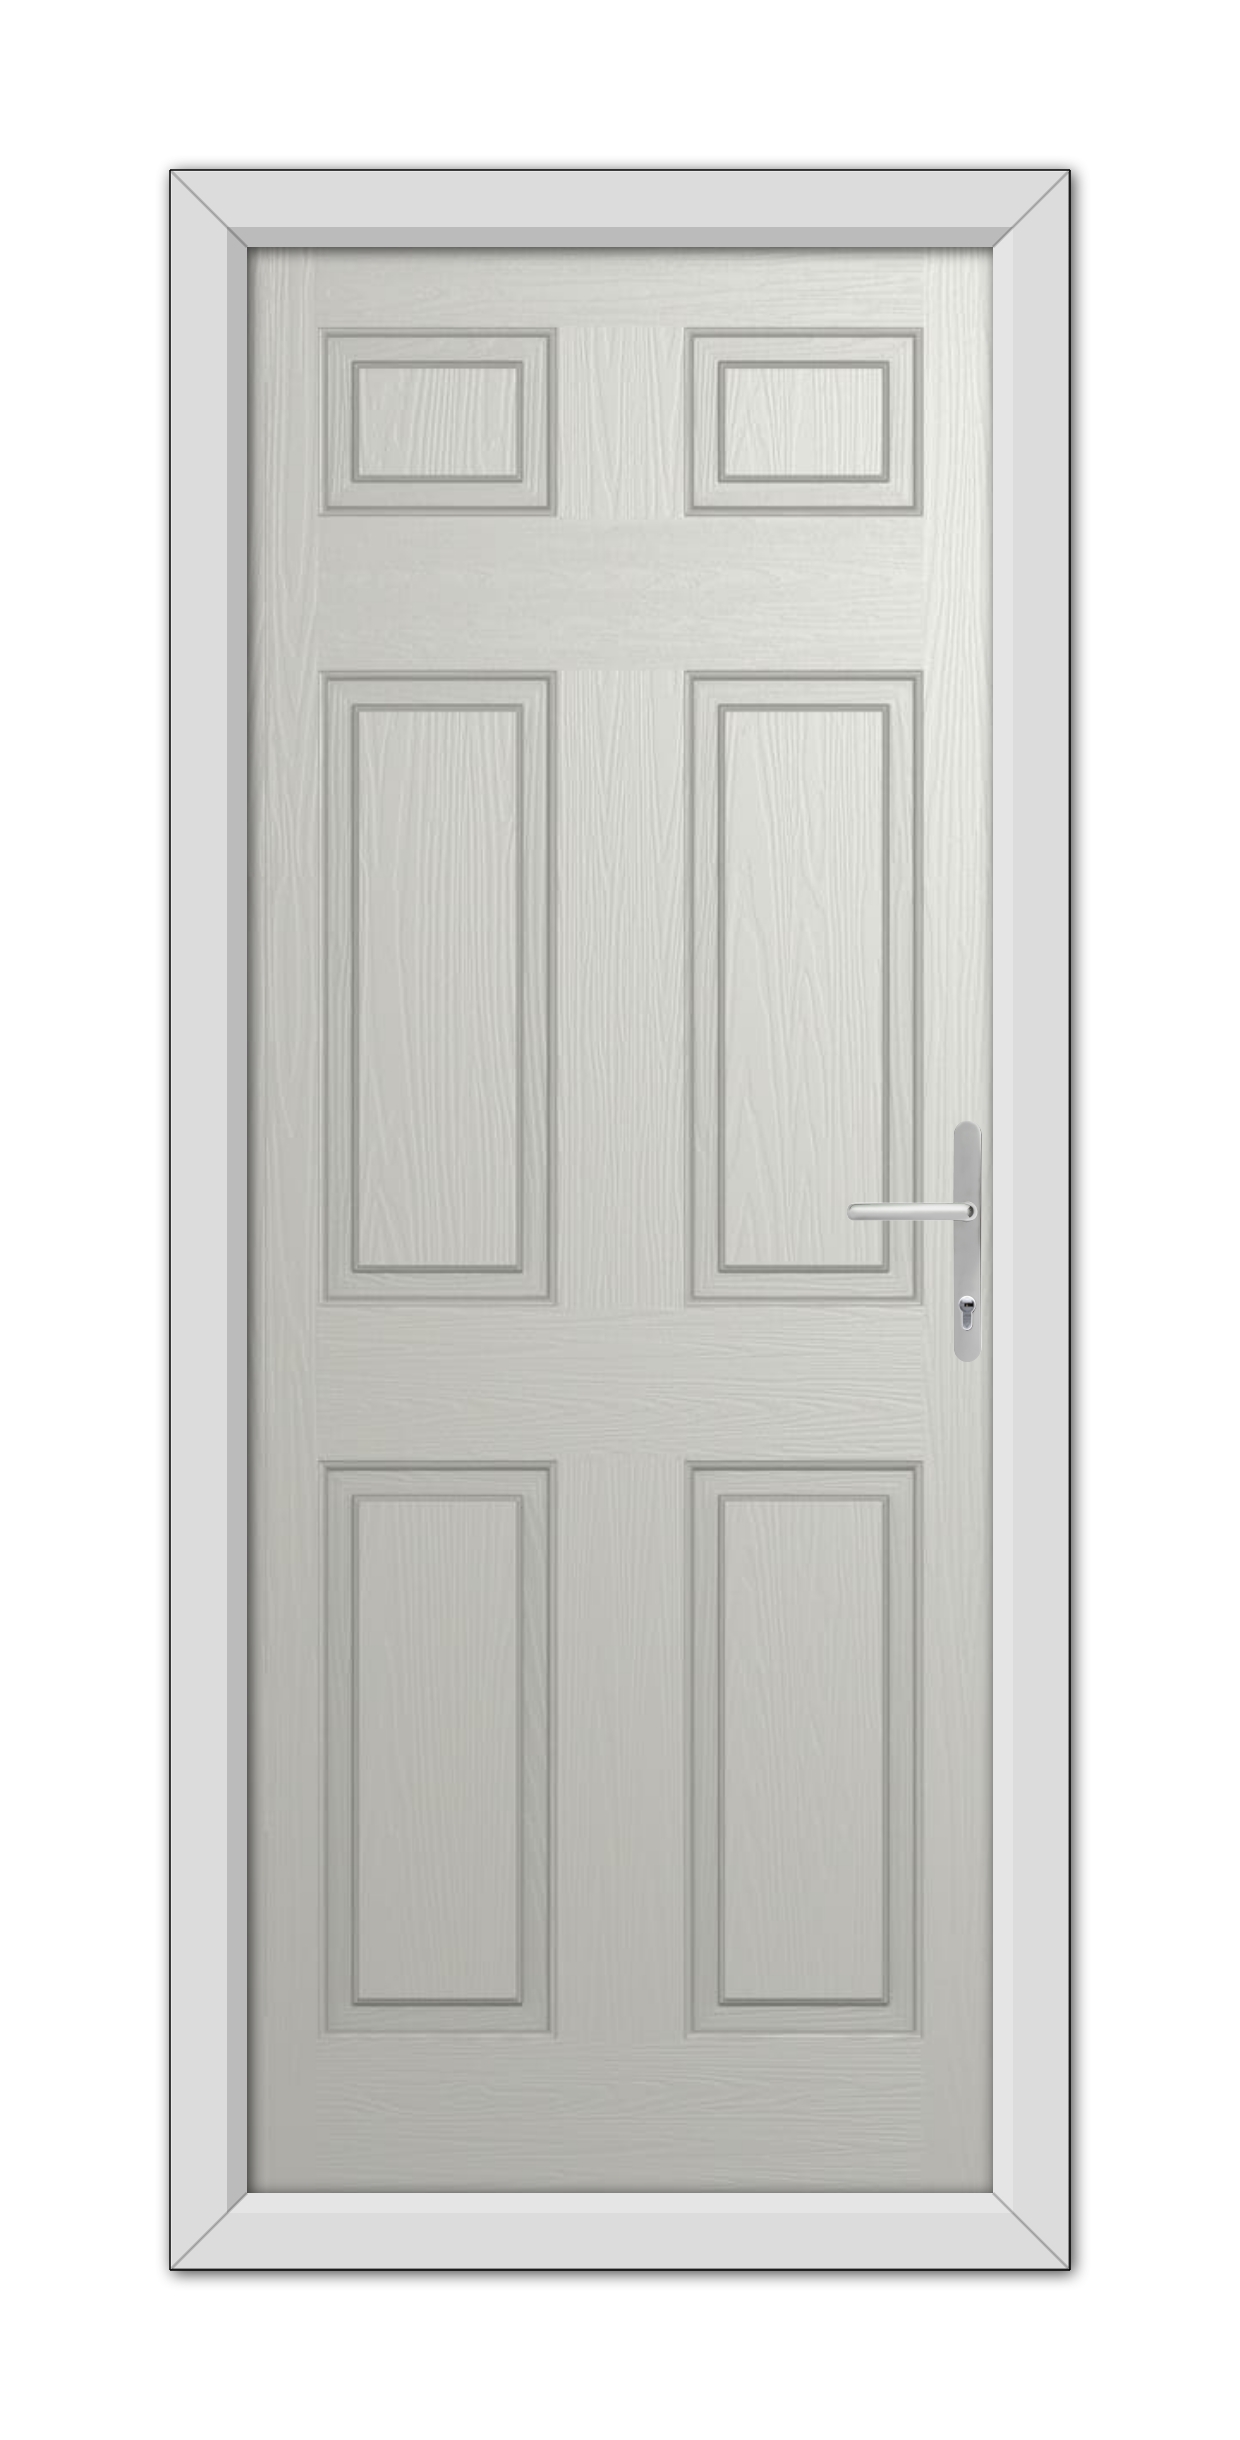 A modern Agate Grey Middleton Solid Composite Door 48mm Timber Core with six panels and a metallic handle, set within a simple frame.